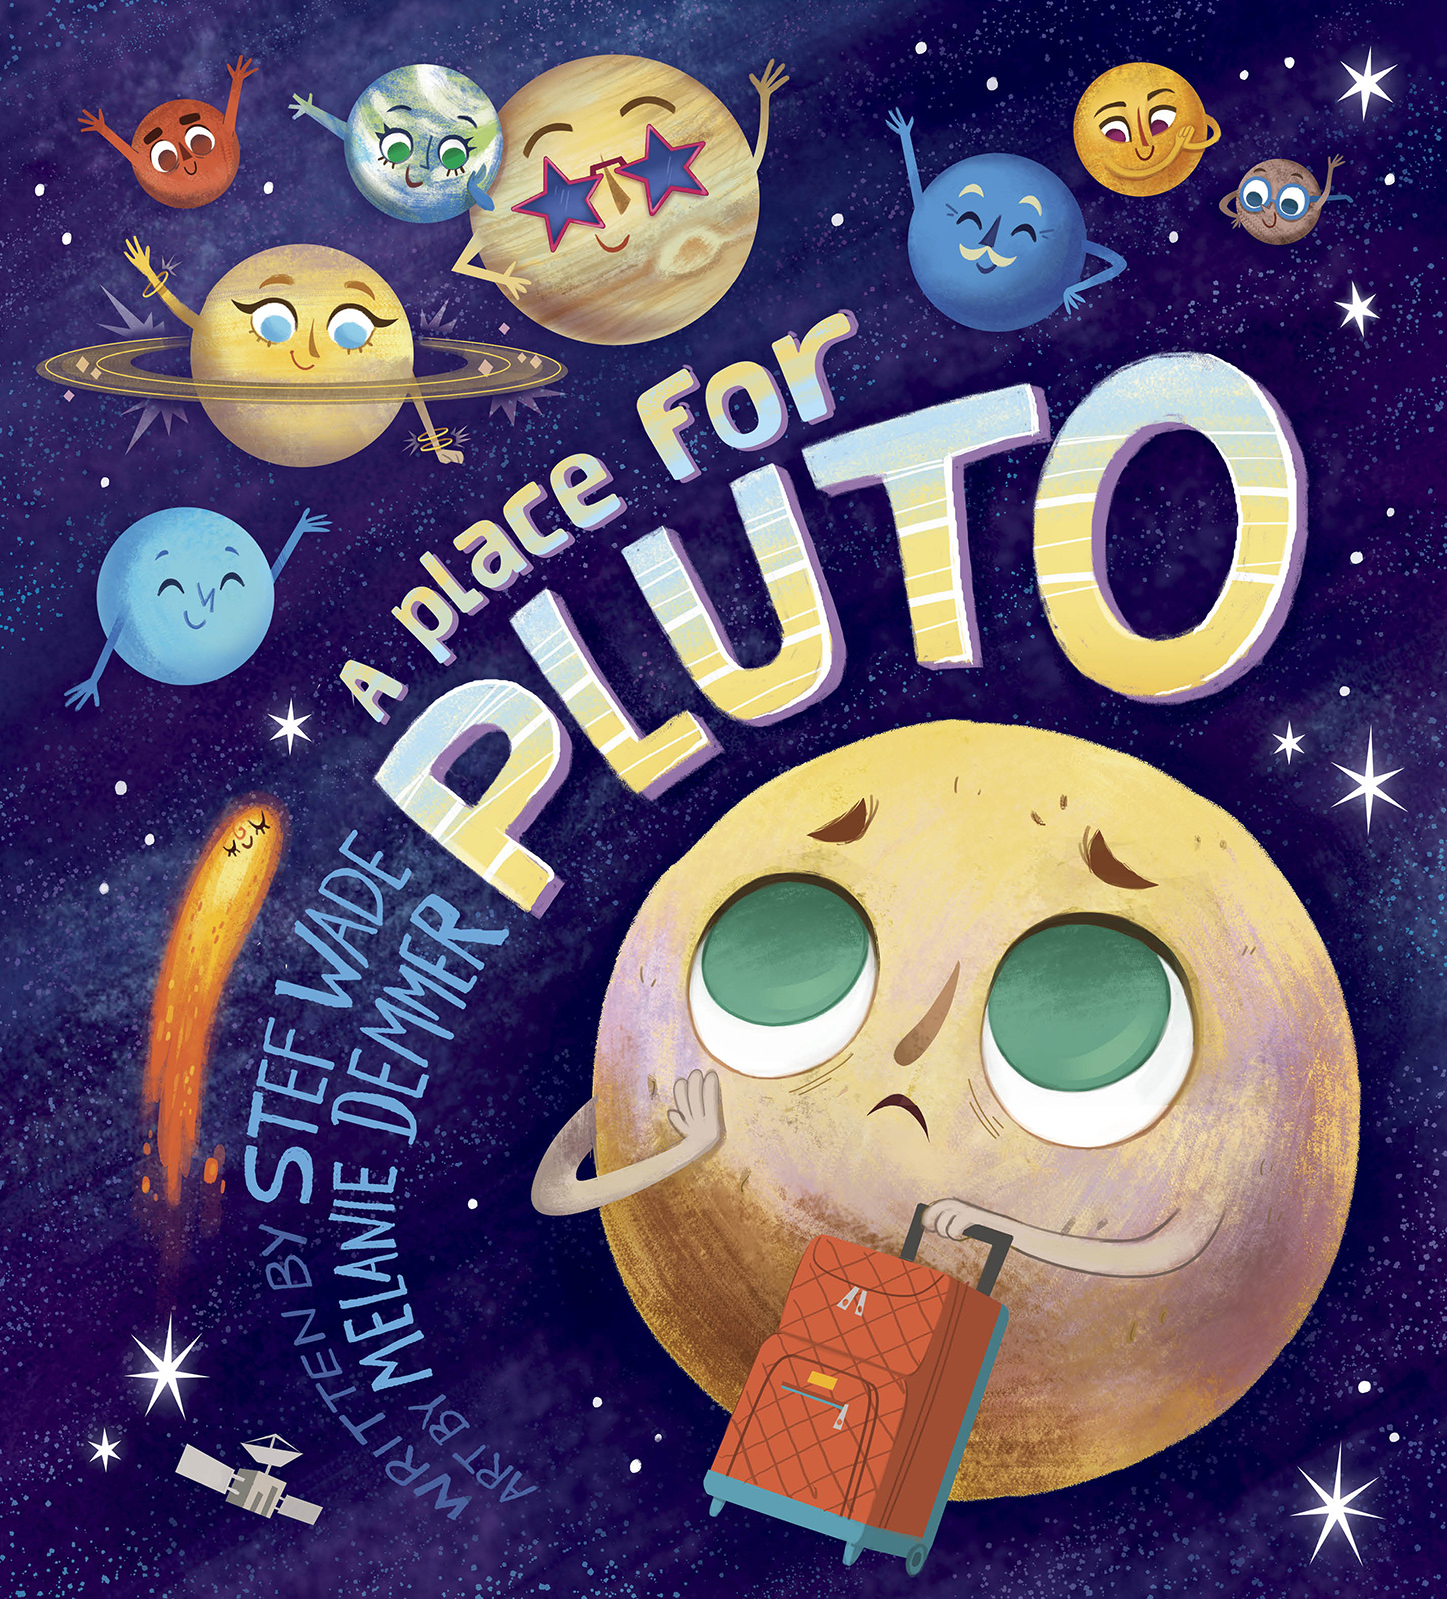 A PLACE FOR PLUTO by Stef Wade